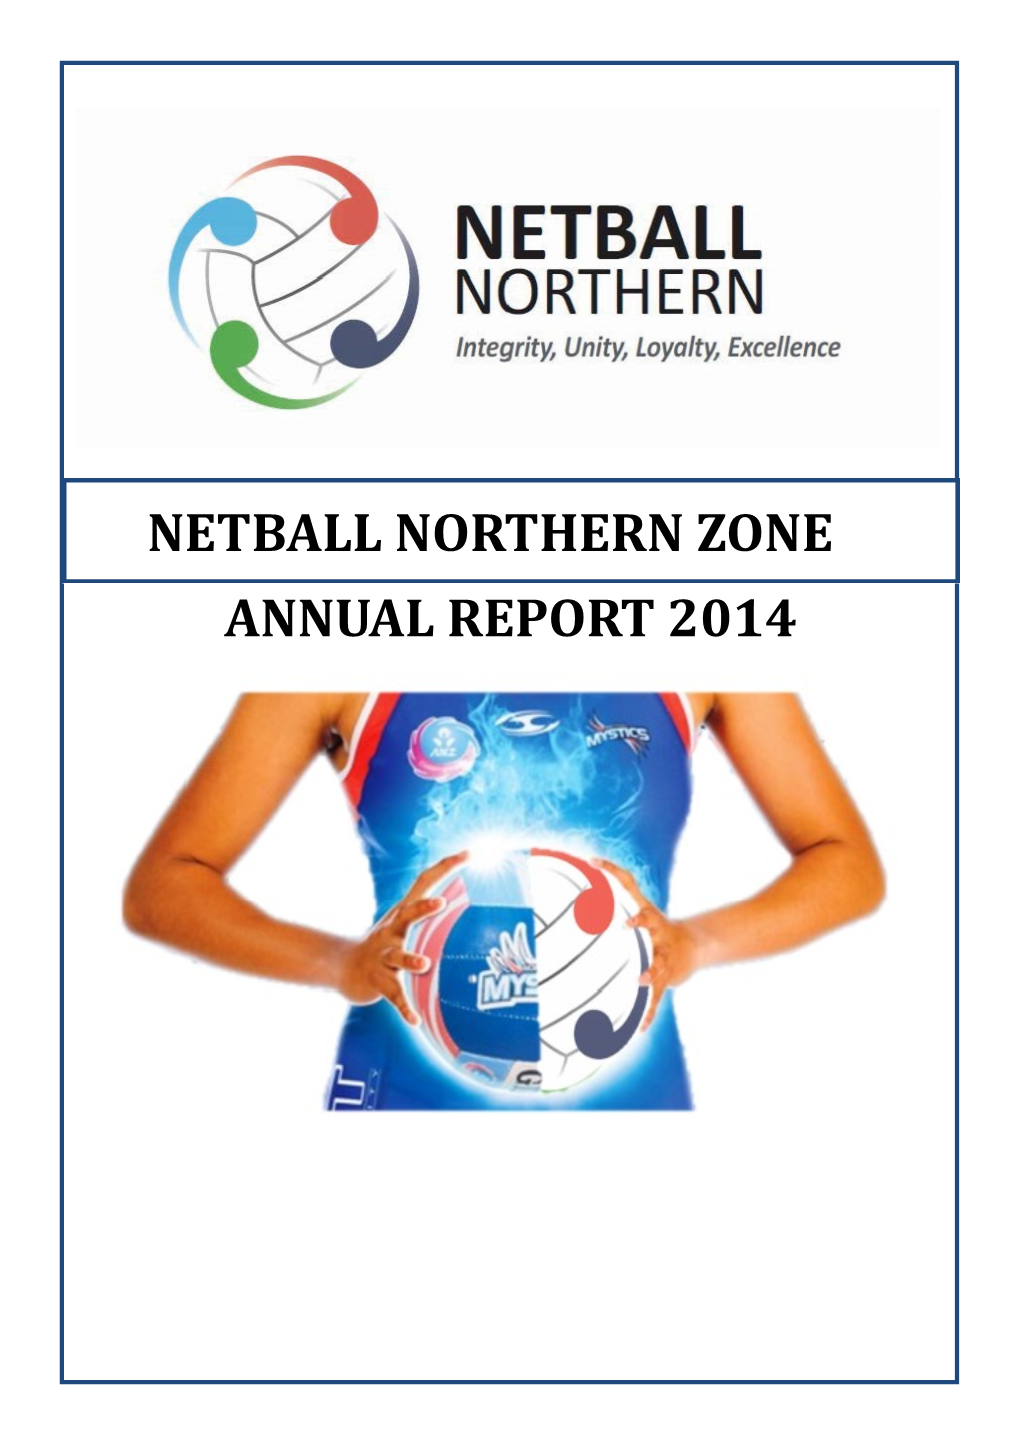 Annual Report 2014 Netball Northern Zone